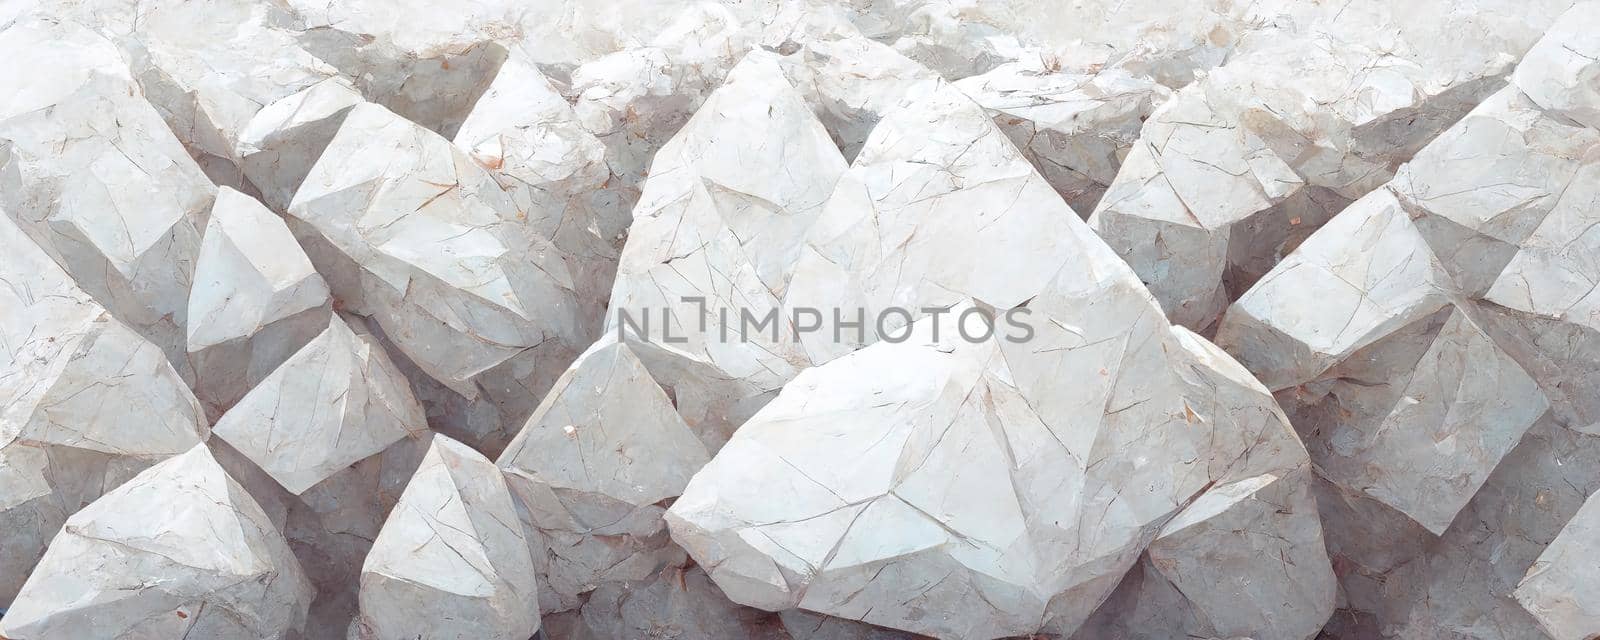 the background is made of polygons in White milky color imitating stones by TRMK